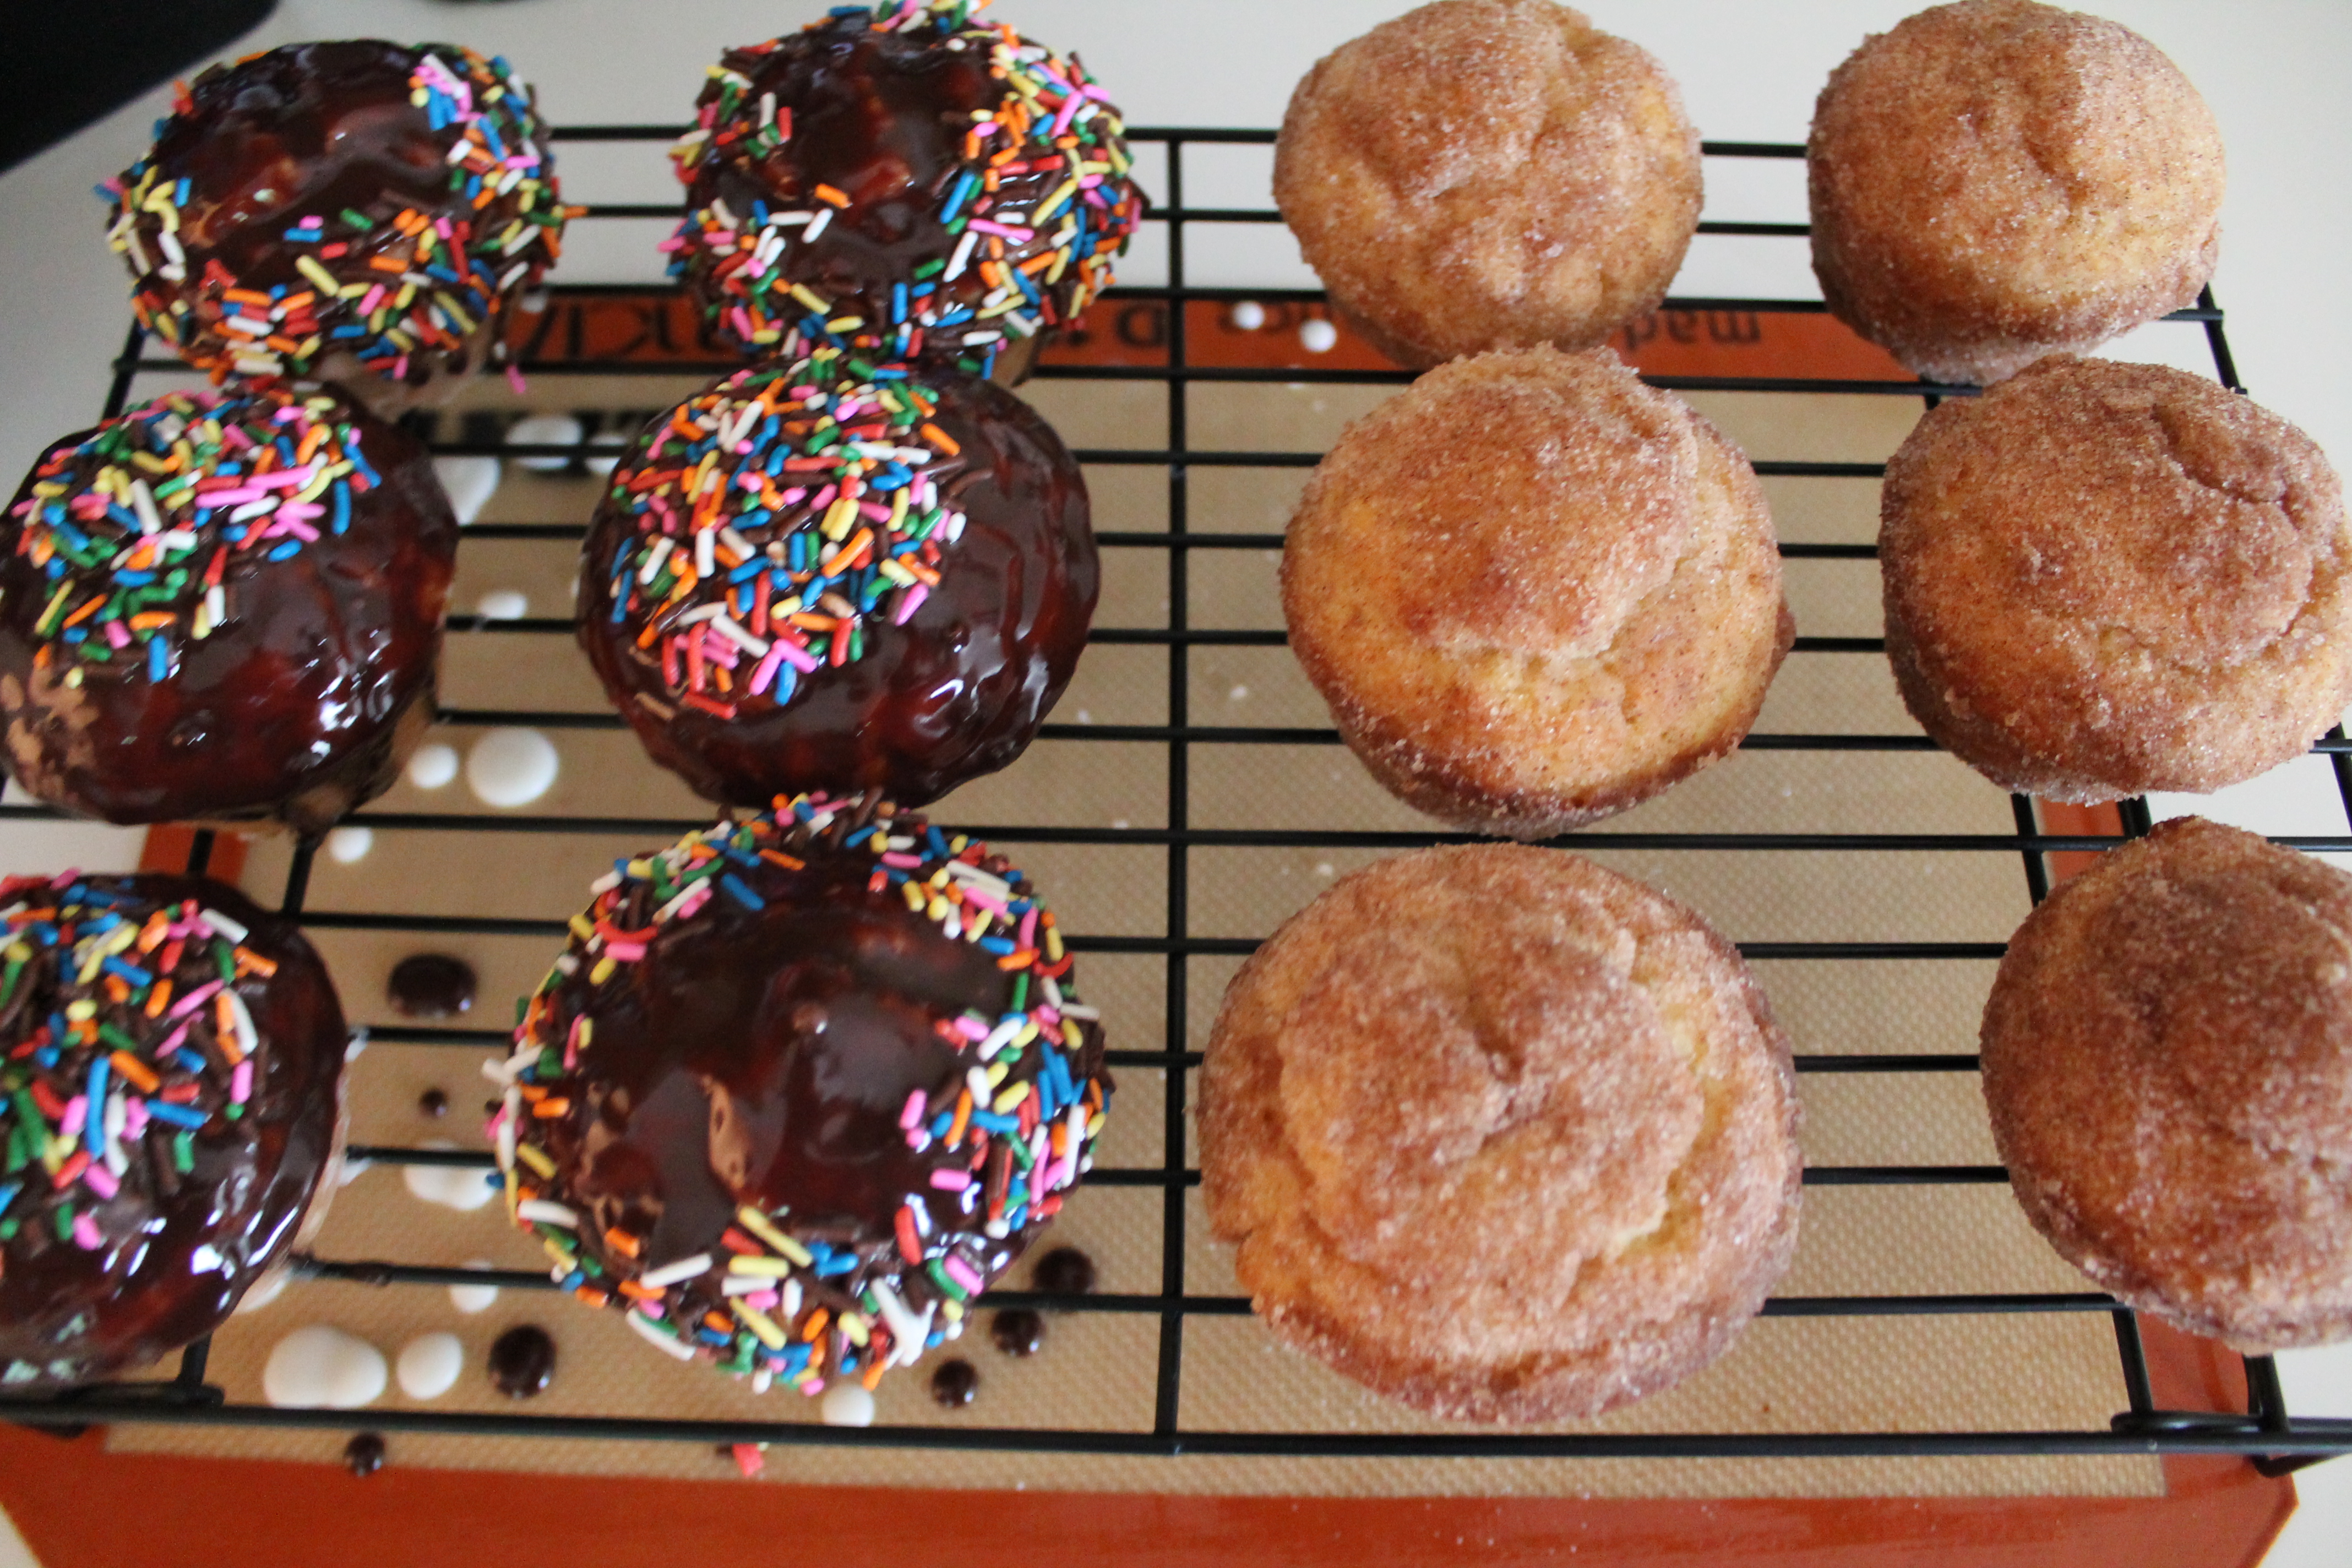 Donuts by the Dozen